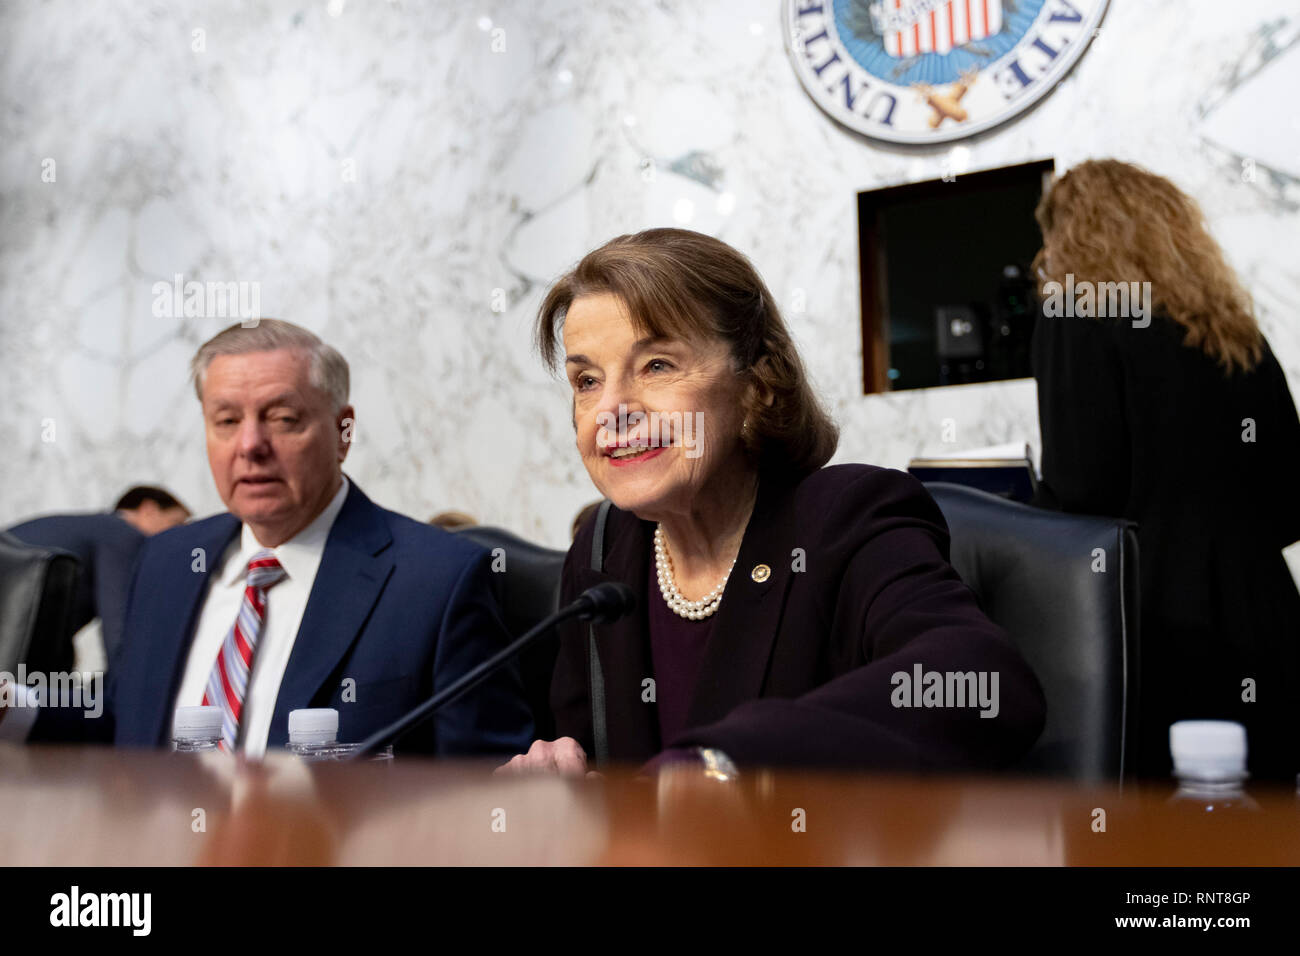 Senator Dianne Feinstein, Democrat of California, takes her seat prior to a Senate Judiciary Committee on Capitol Hill in Washington, DC on January 16, 2019. Stock Photo